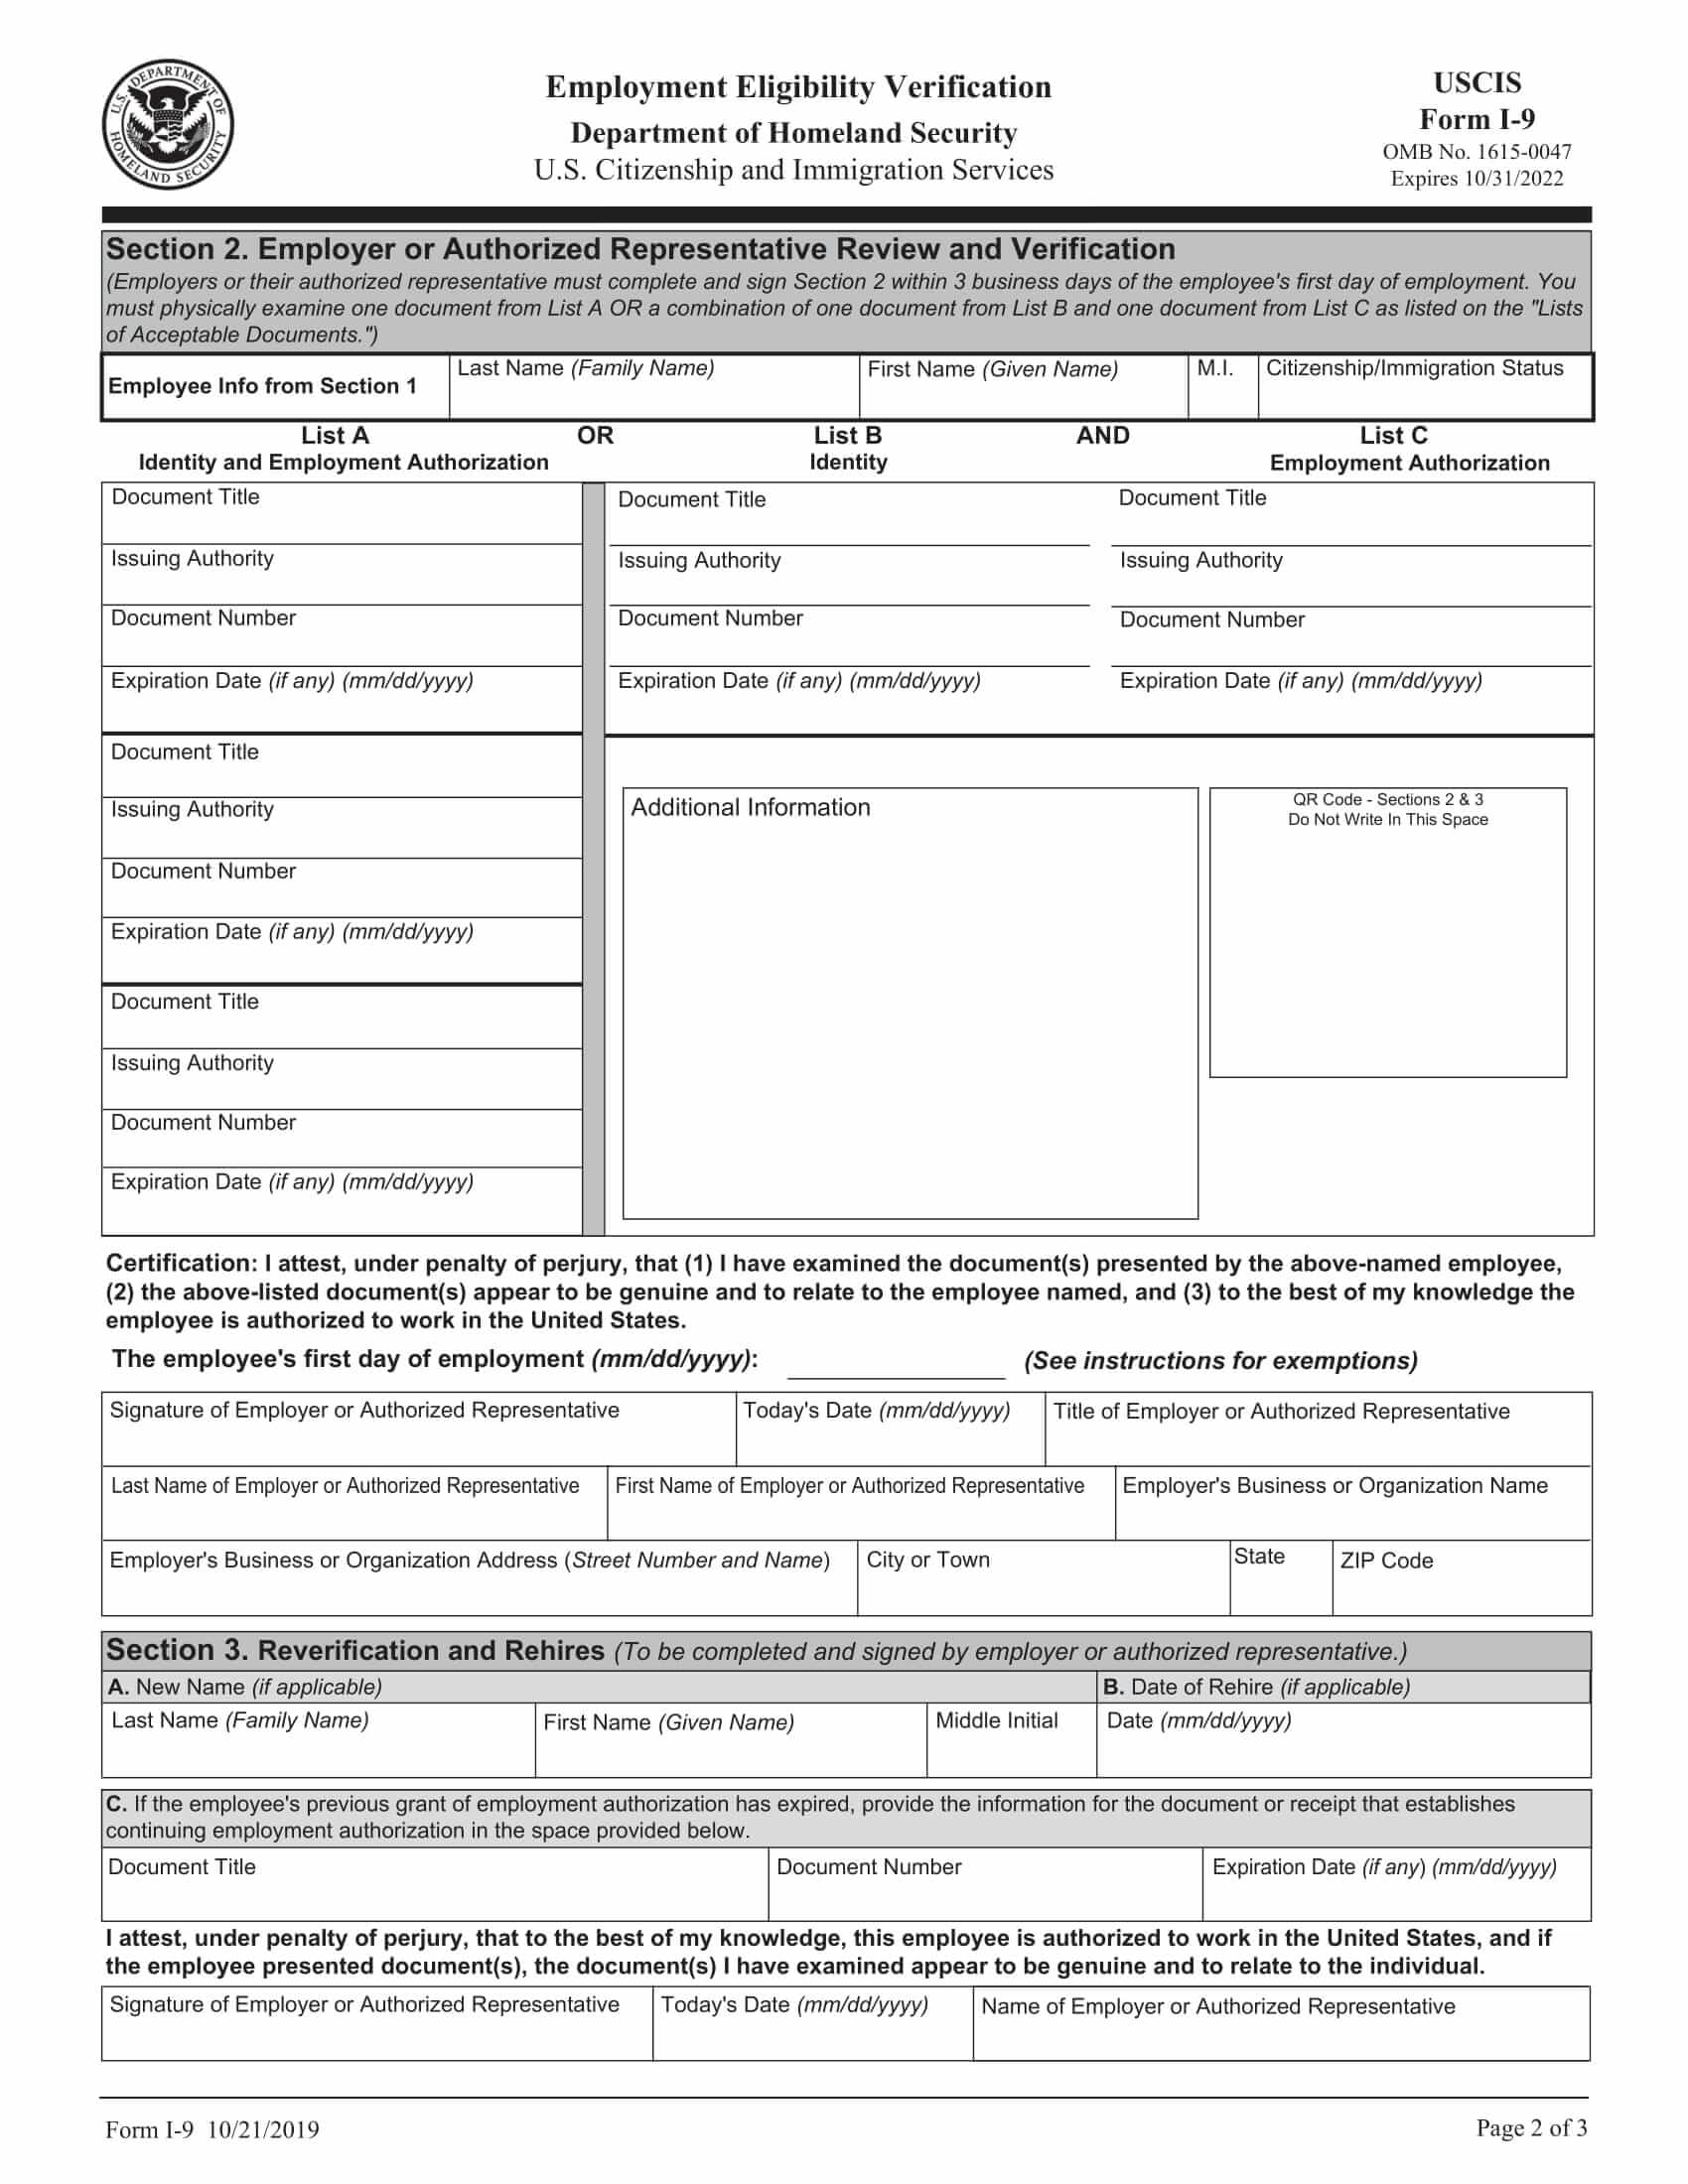 sample-i-9-employment-eligibility-verification-form-completed-images